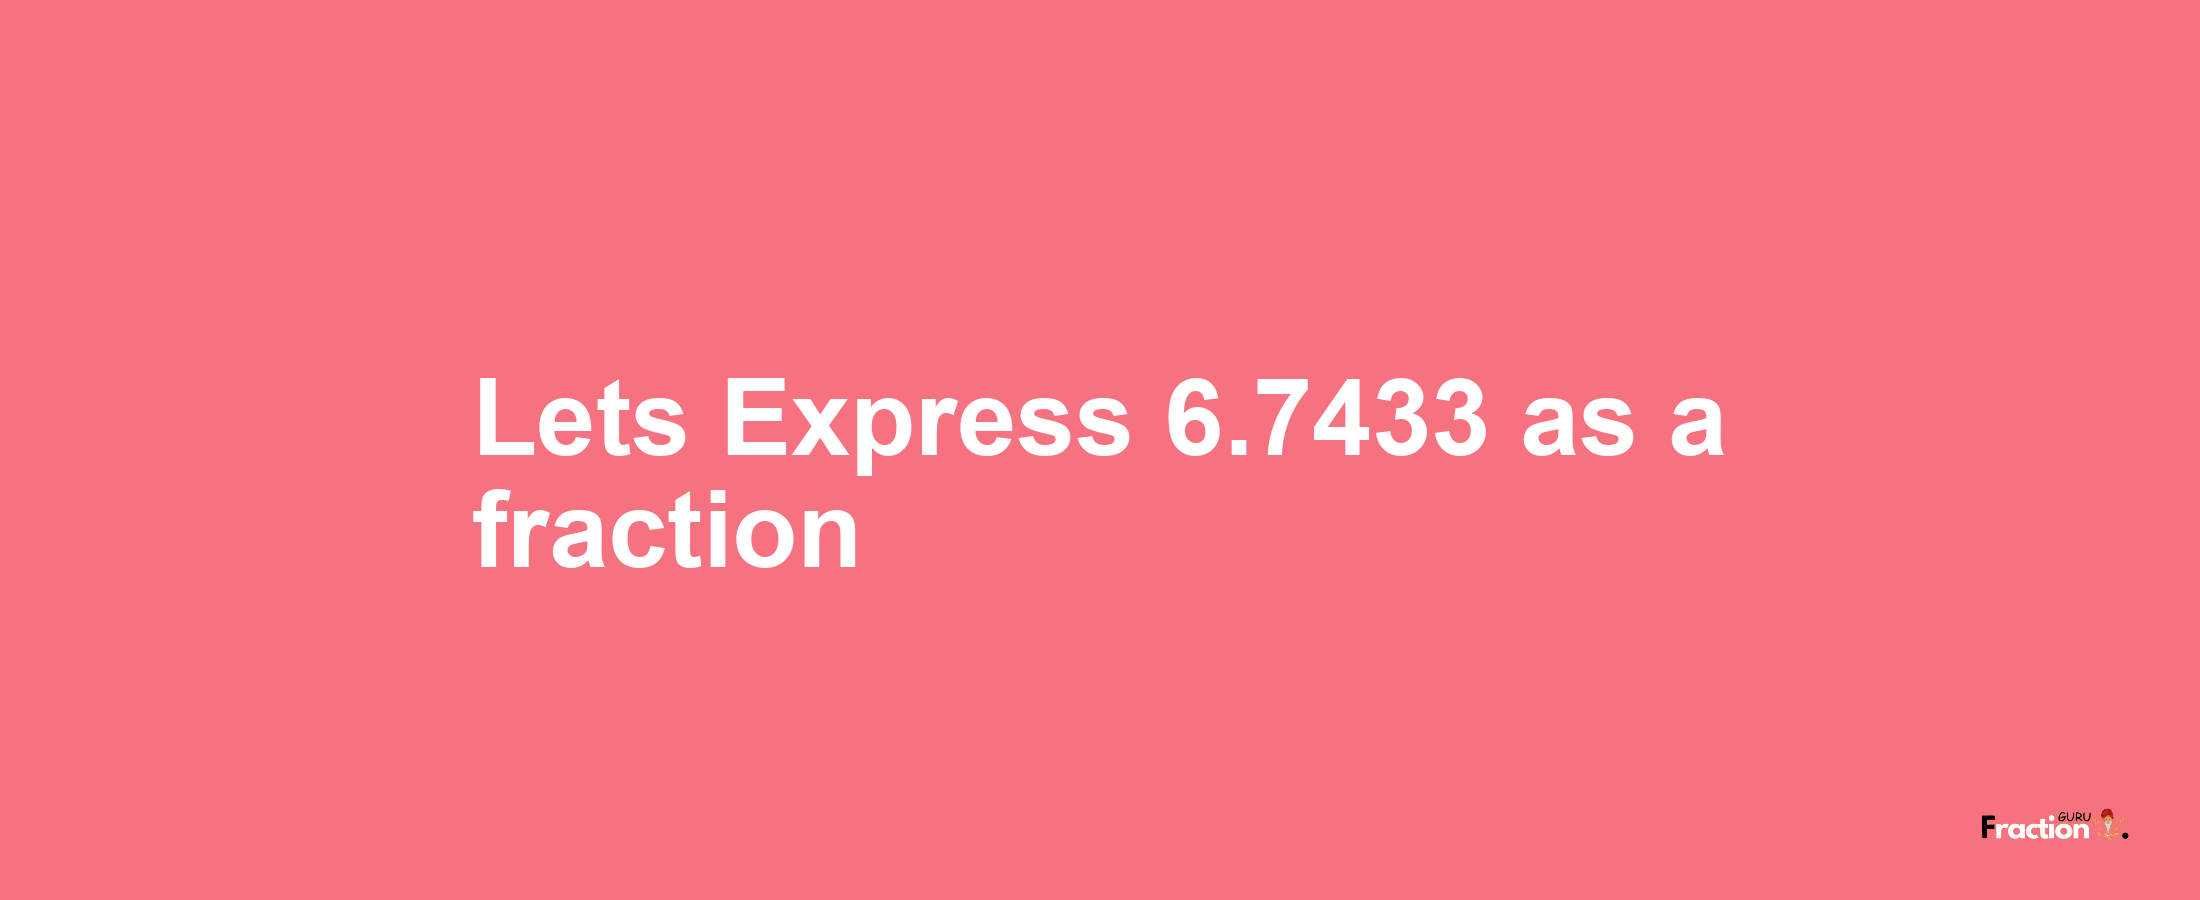 Lets Express 6.7433 as afraction